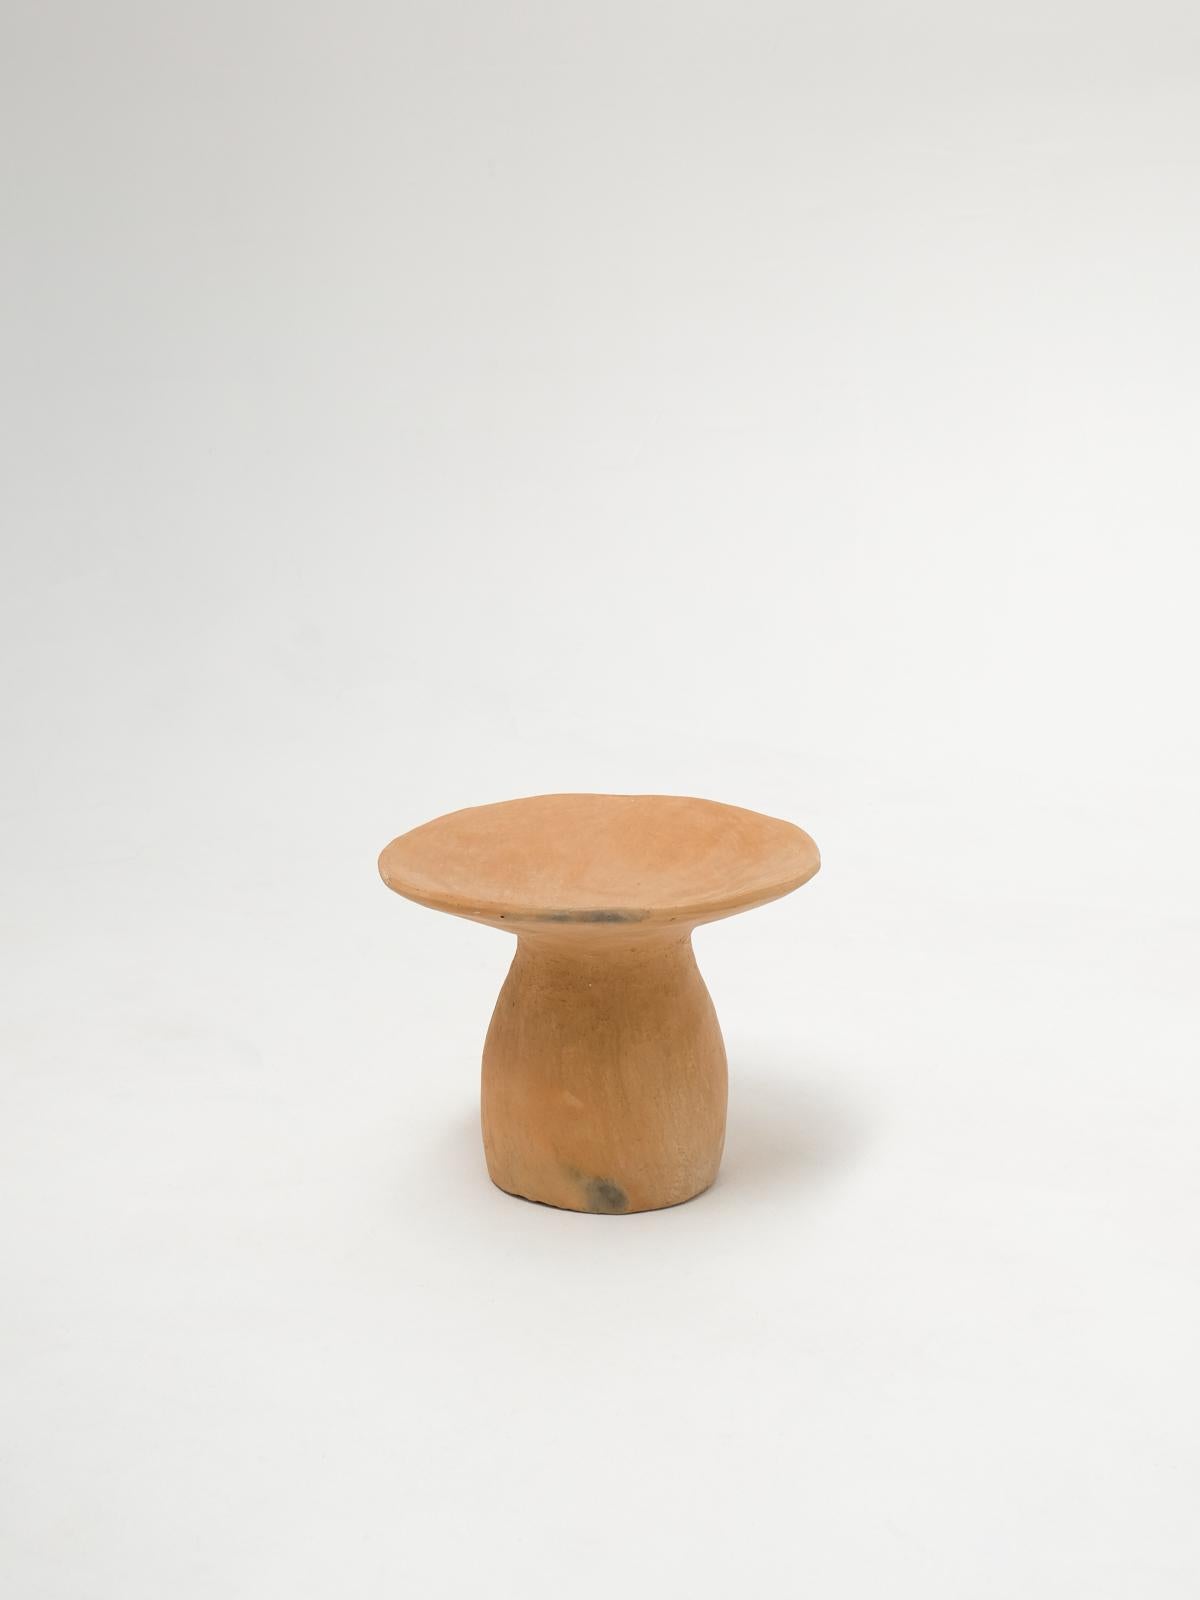 Terracotta contemporary Side Tables Made of local Clay, Handbuilt handfired For Sale 7